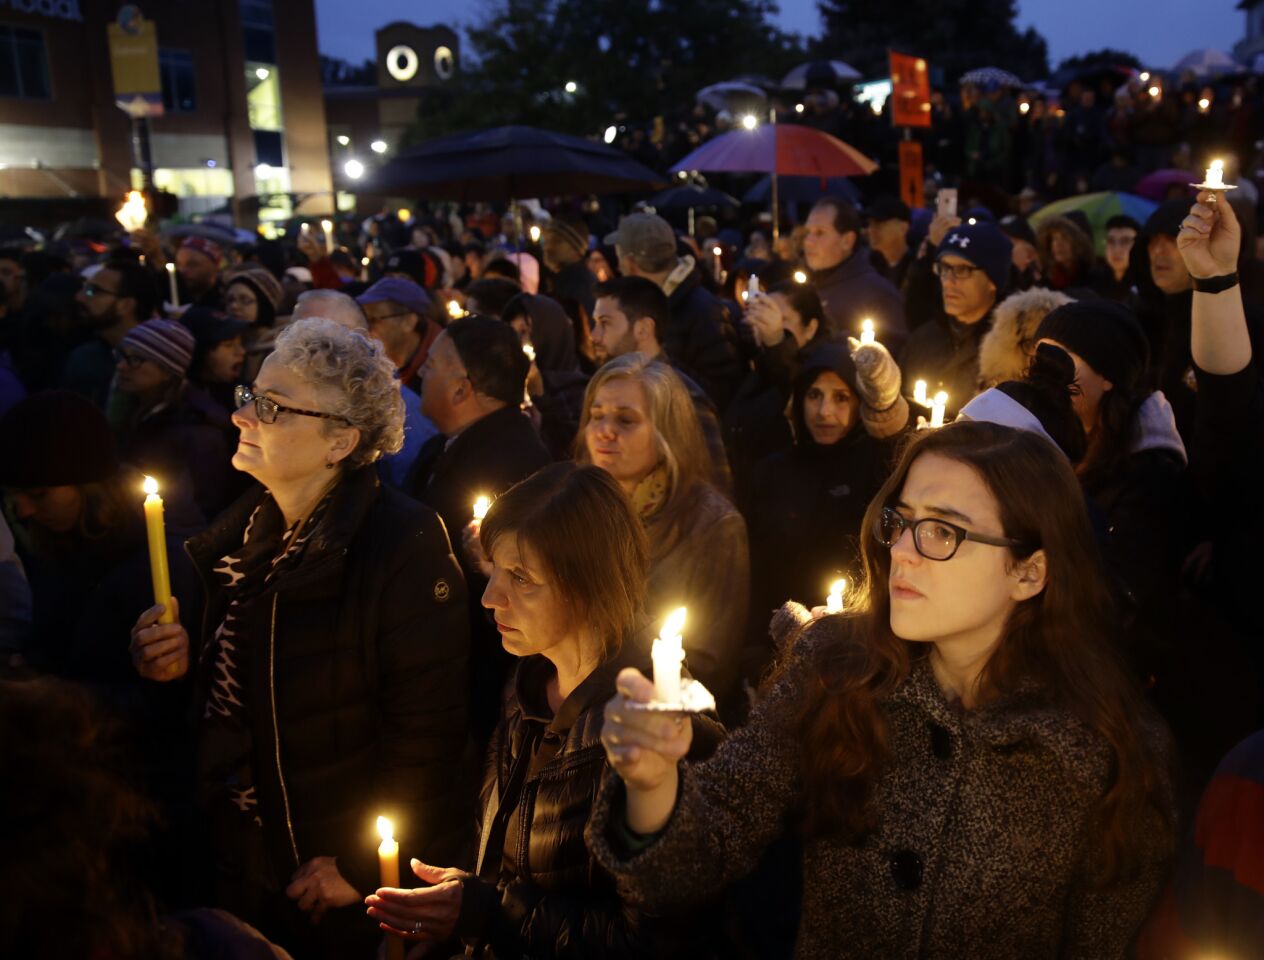 People hold candles as they gather for a vigil in the aftermath of a deadly shooting at the Tree of Life synangogue in the Squirrel Hill neighborhood of Pittsburgh on Oct. 27, 2018.